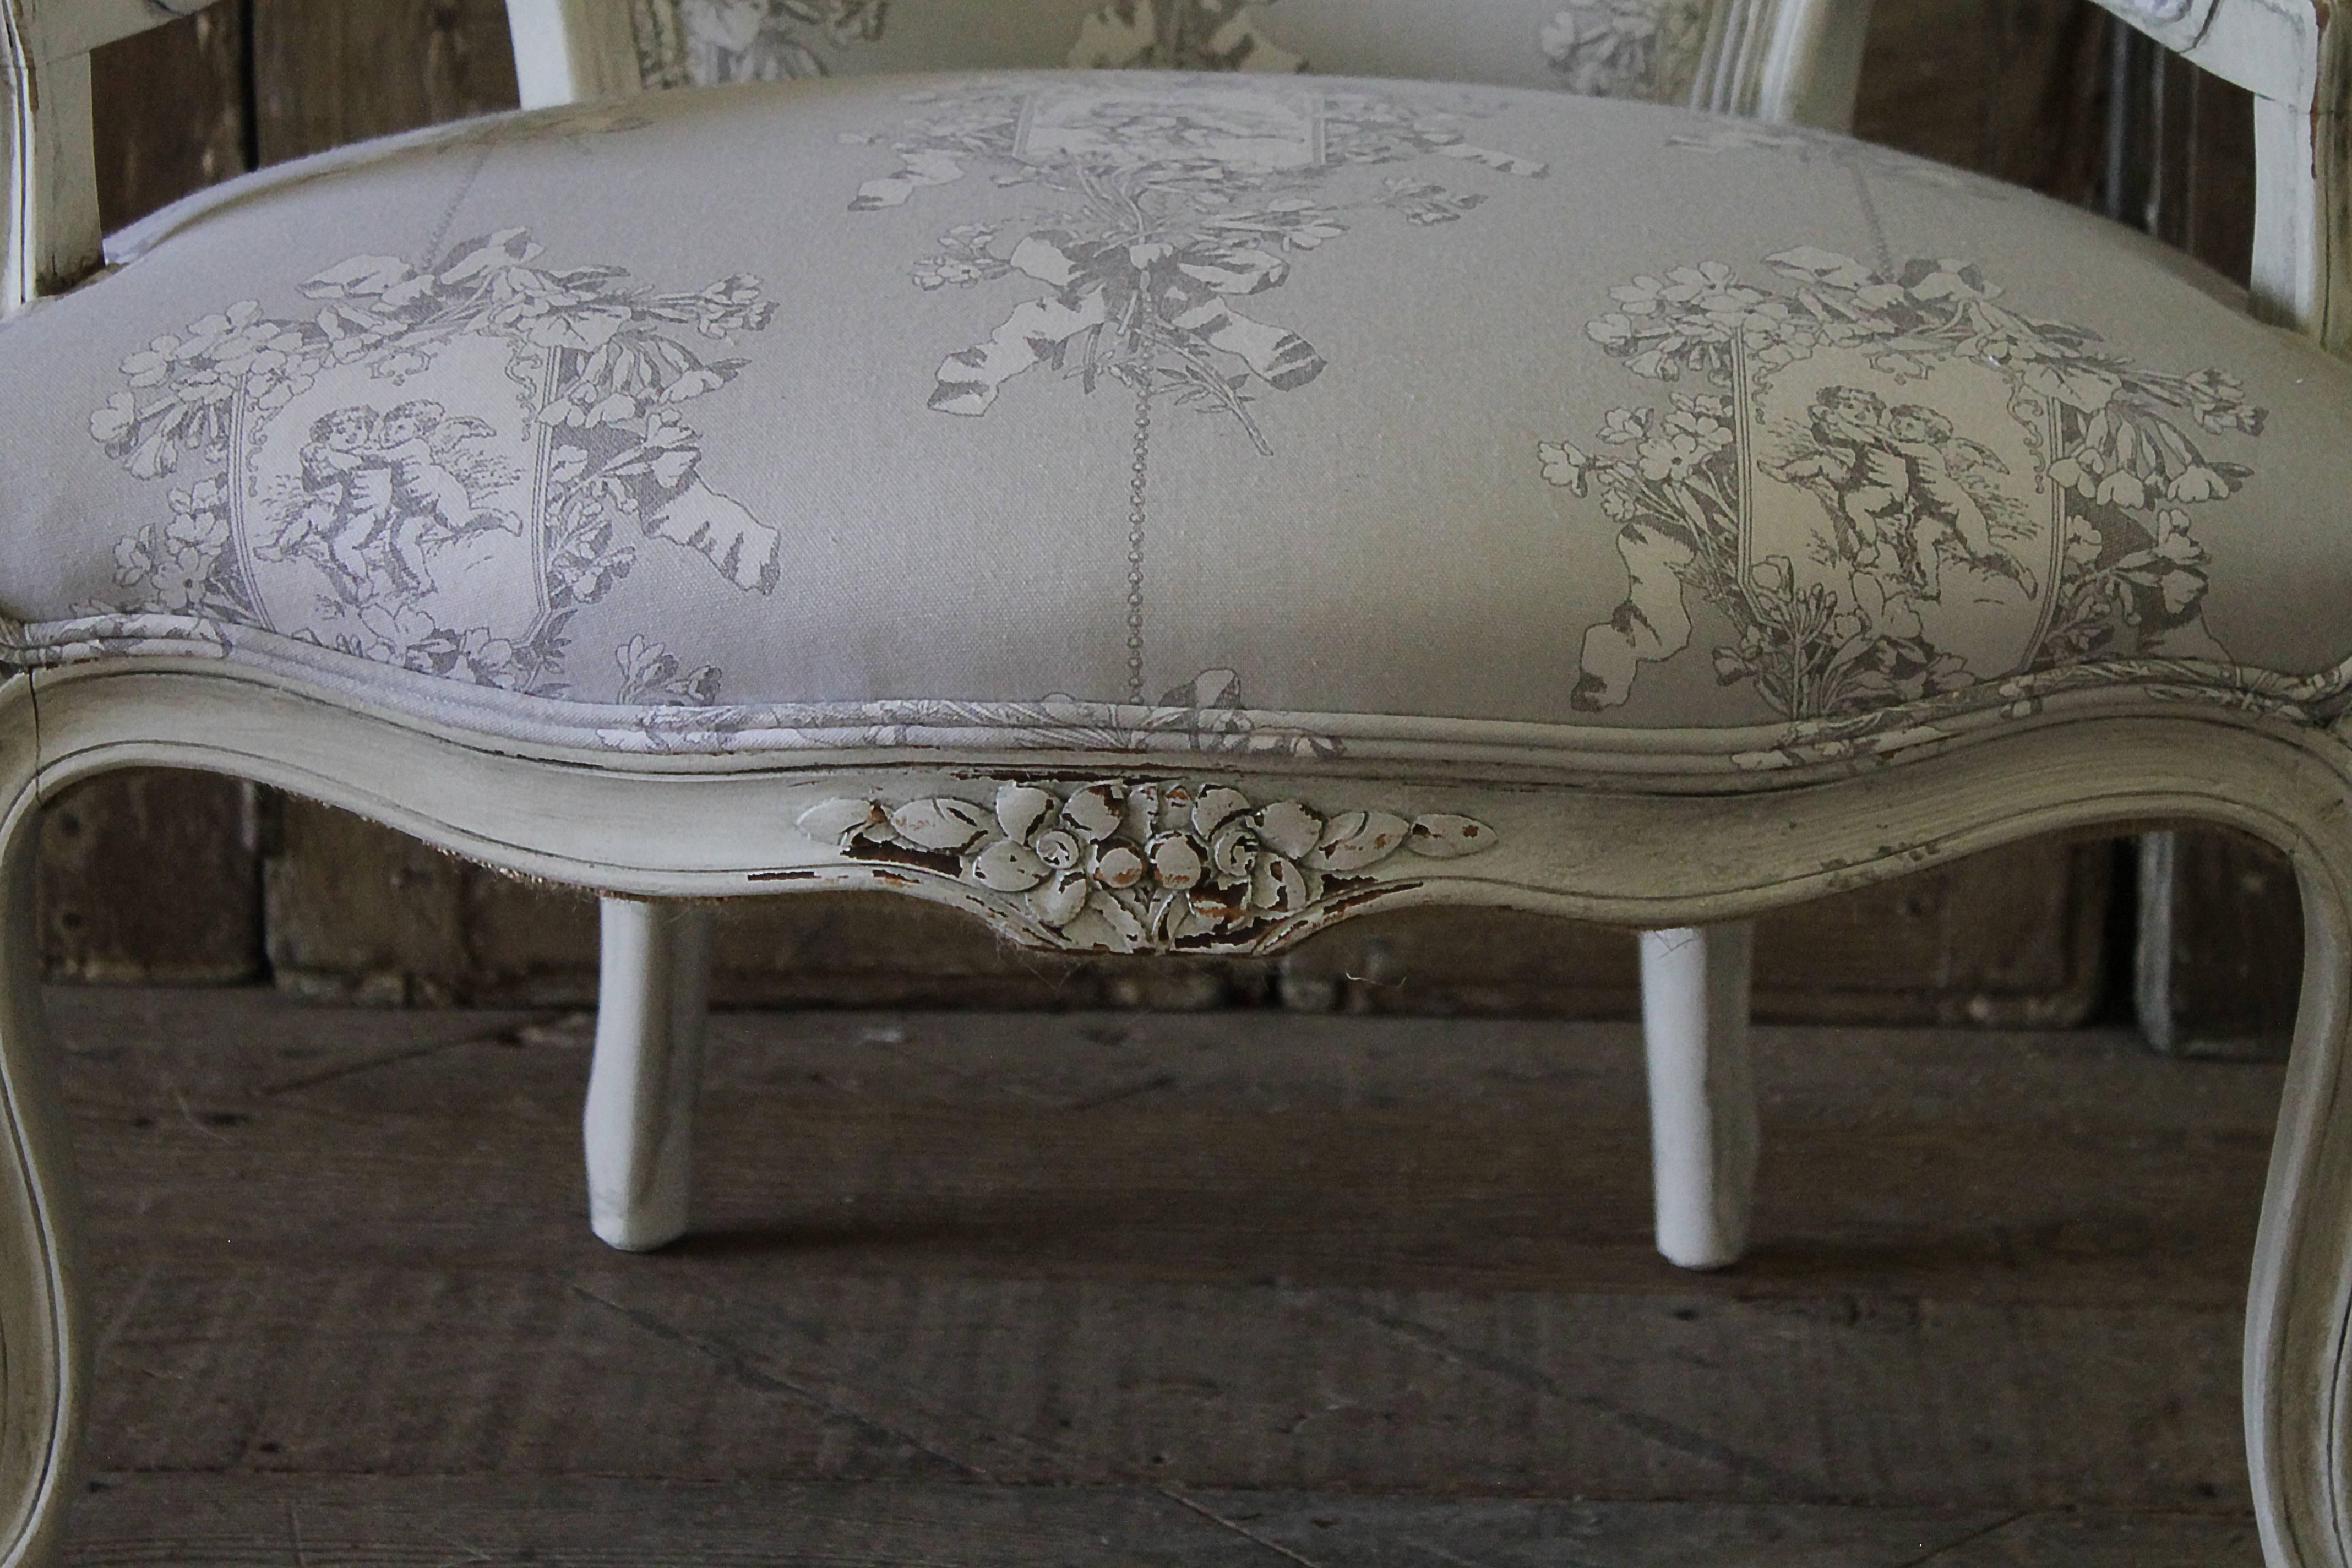 Early 20th century Louis XV style painted childs chair in grey Toile de Jouy
Painted in a soft oyster white finish, with subtle distressed edges, and antique patina. New upholstery in grey and white Toile de Jouy.
Very stabile, ready for everyday